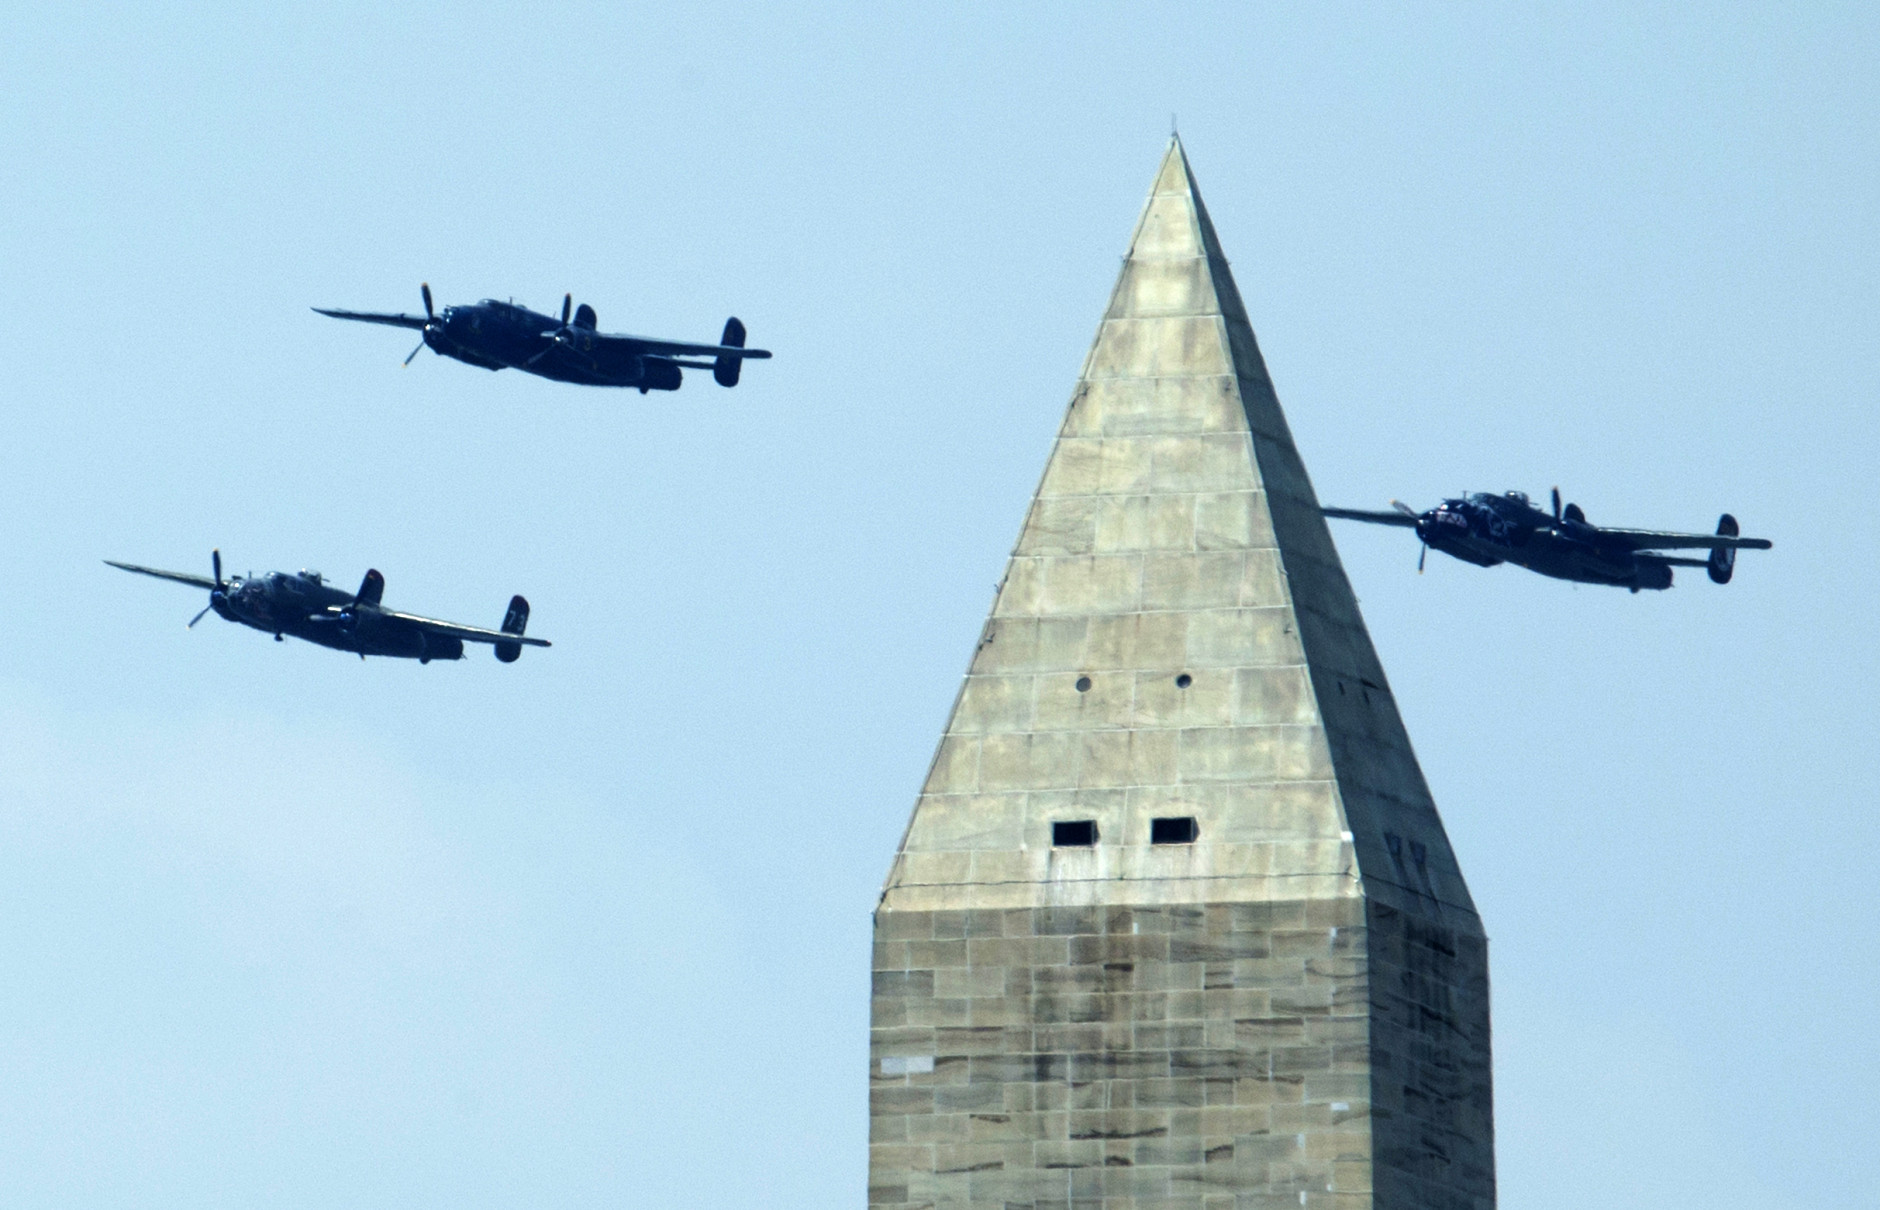 The North American B-25 Mitchell bombers fly in the Doolittle Raid formation during a flyover near the Washington Monument, Friday, May 8, 2015, over Washington. The World War II vintage aircraft were marking the 70th anniversary of the end of the war in Europe on May 8, 1945, and commemorating the Allied victory in Europe during World War II. (AP Photo/Manuel Balce Ceneta)